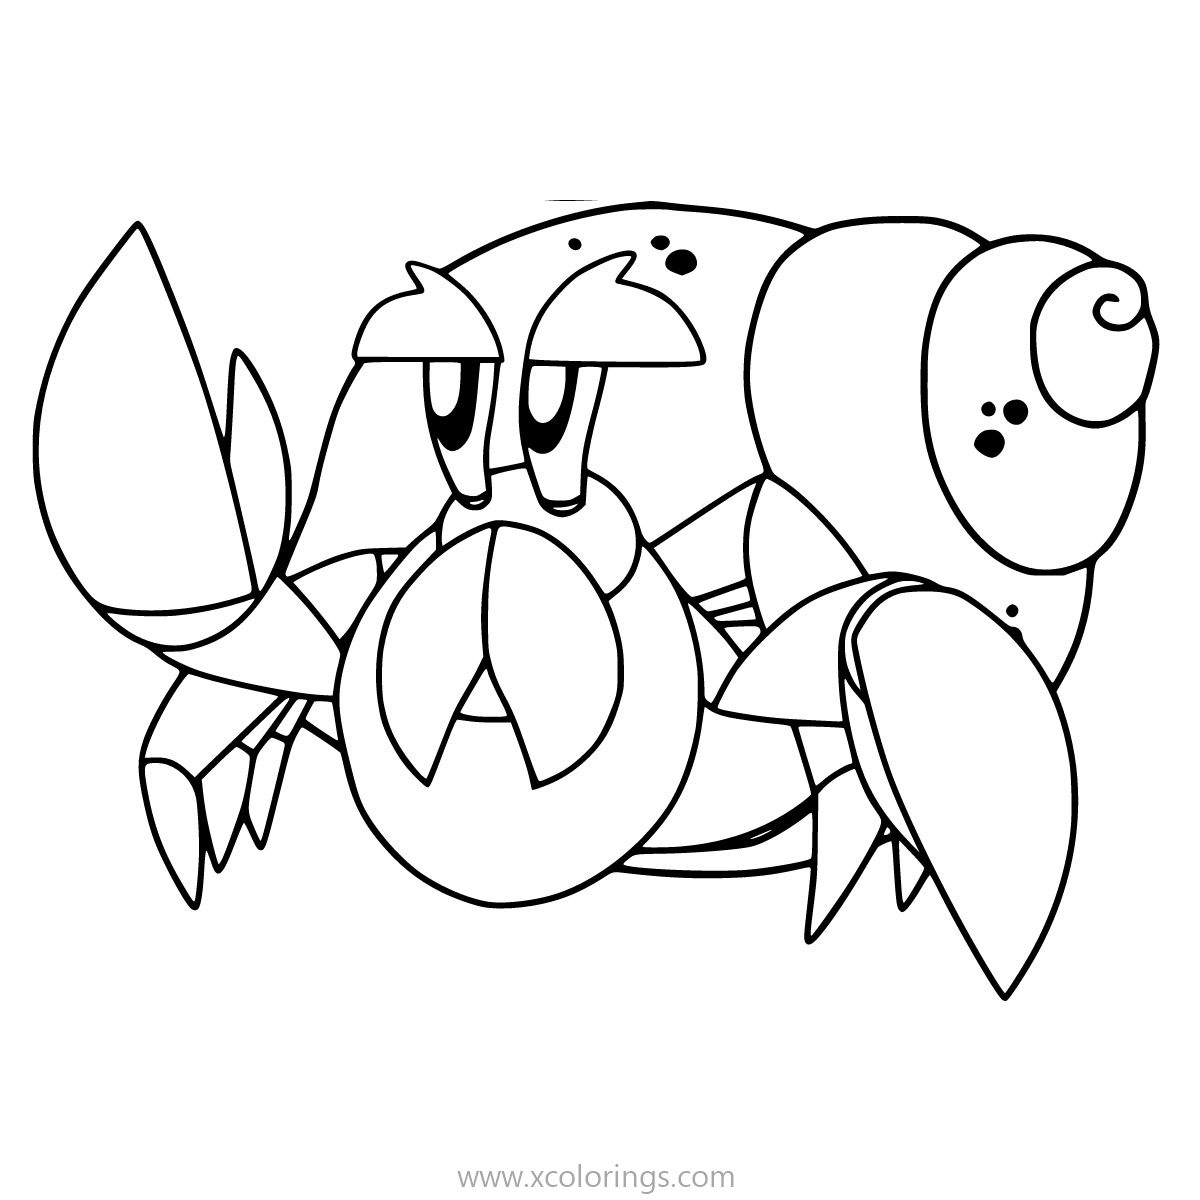 Free Puffin Rock Coloring Pages Bernie Hermit Crab printable